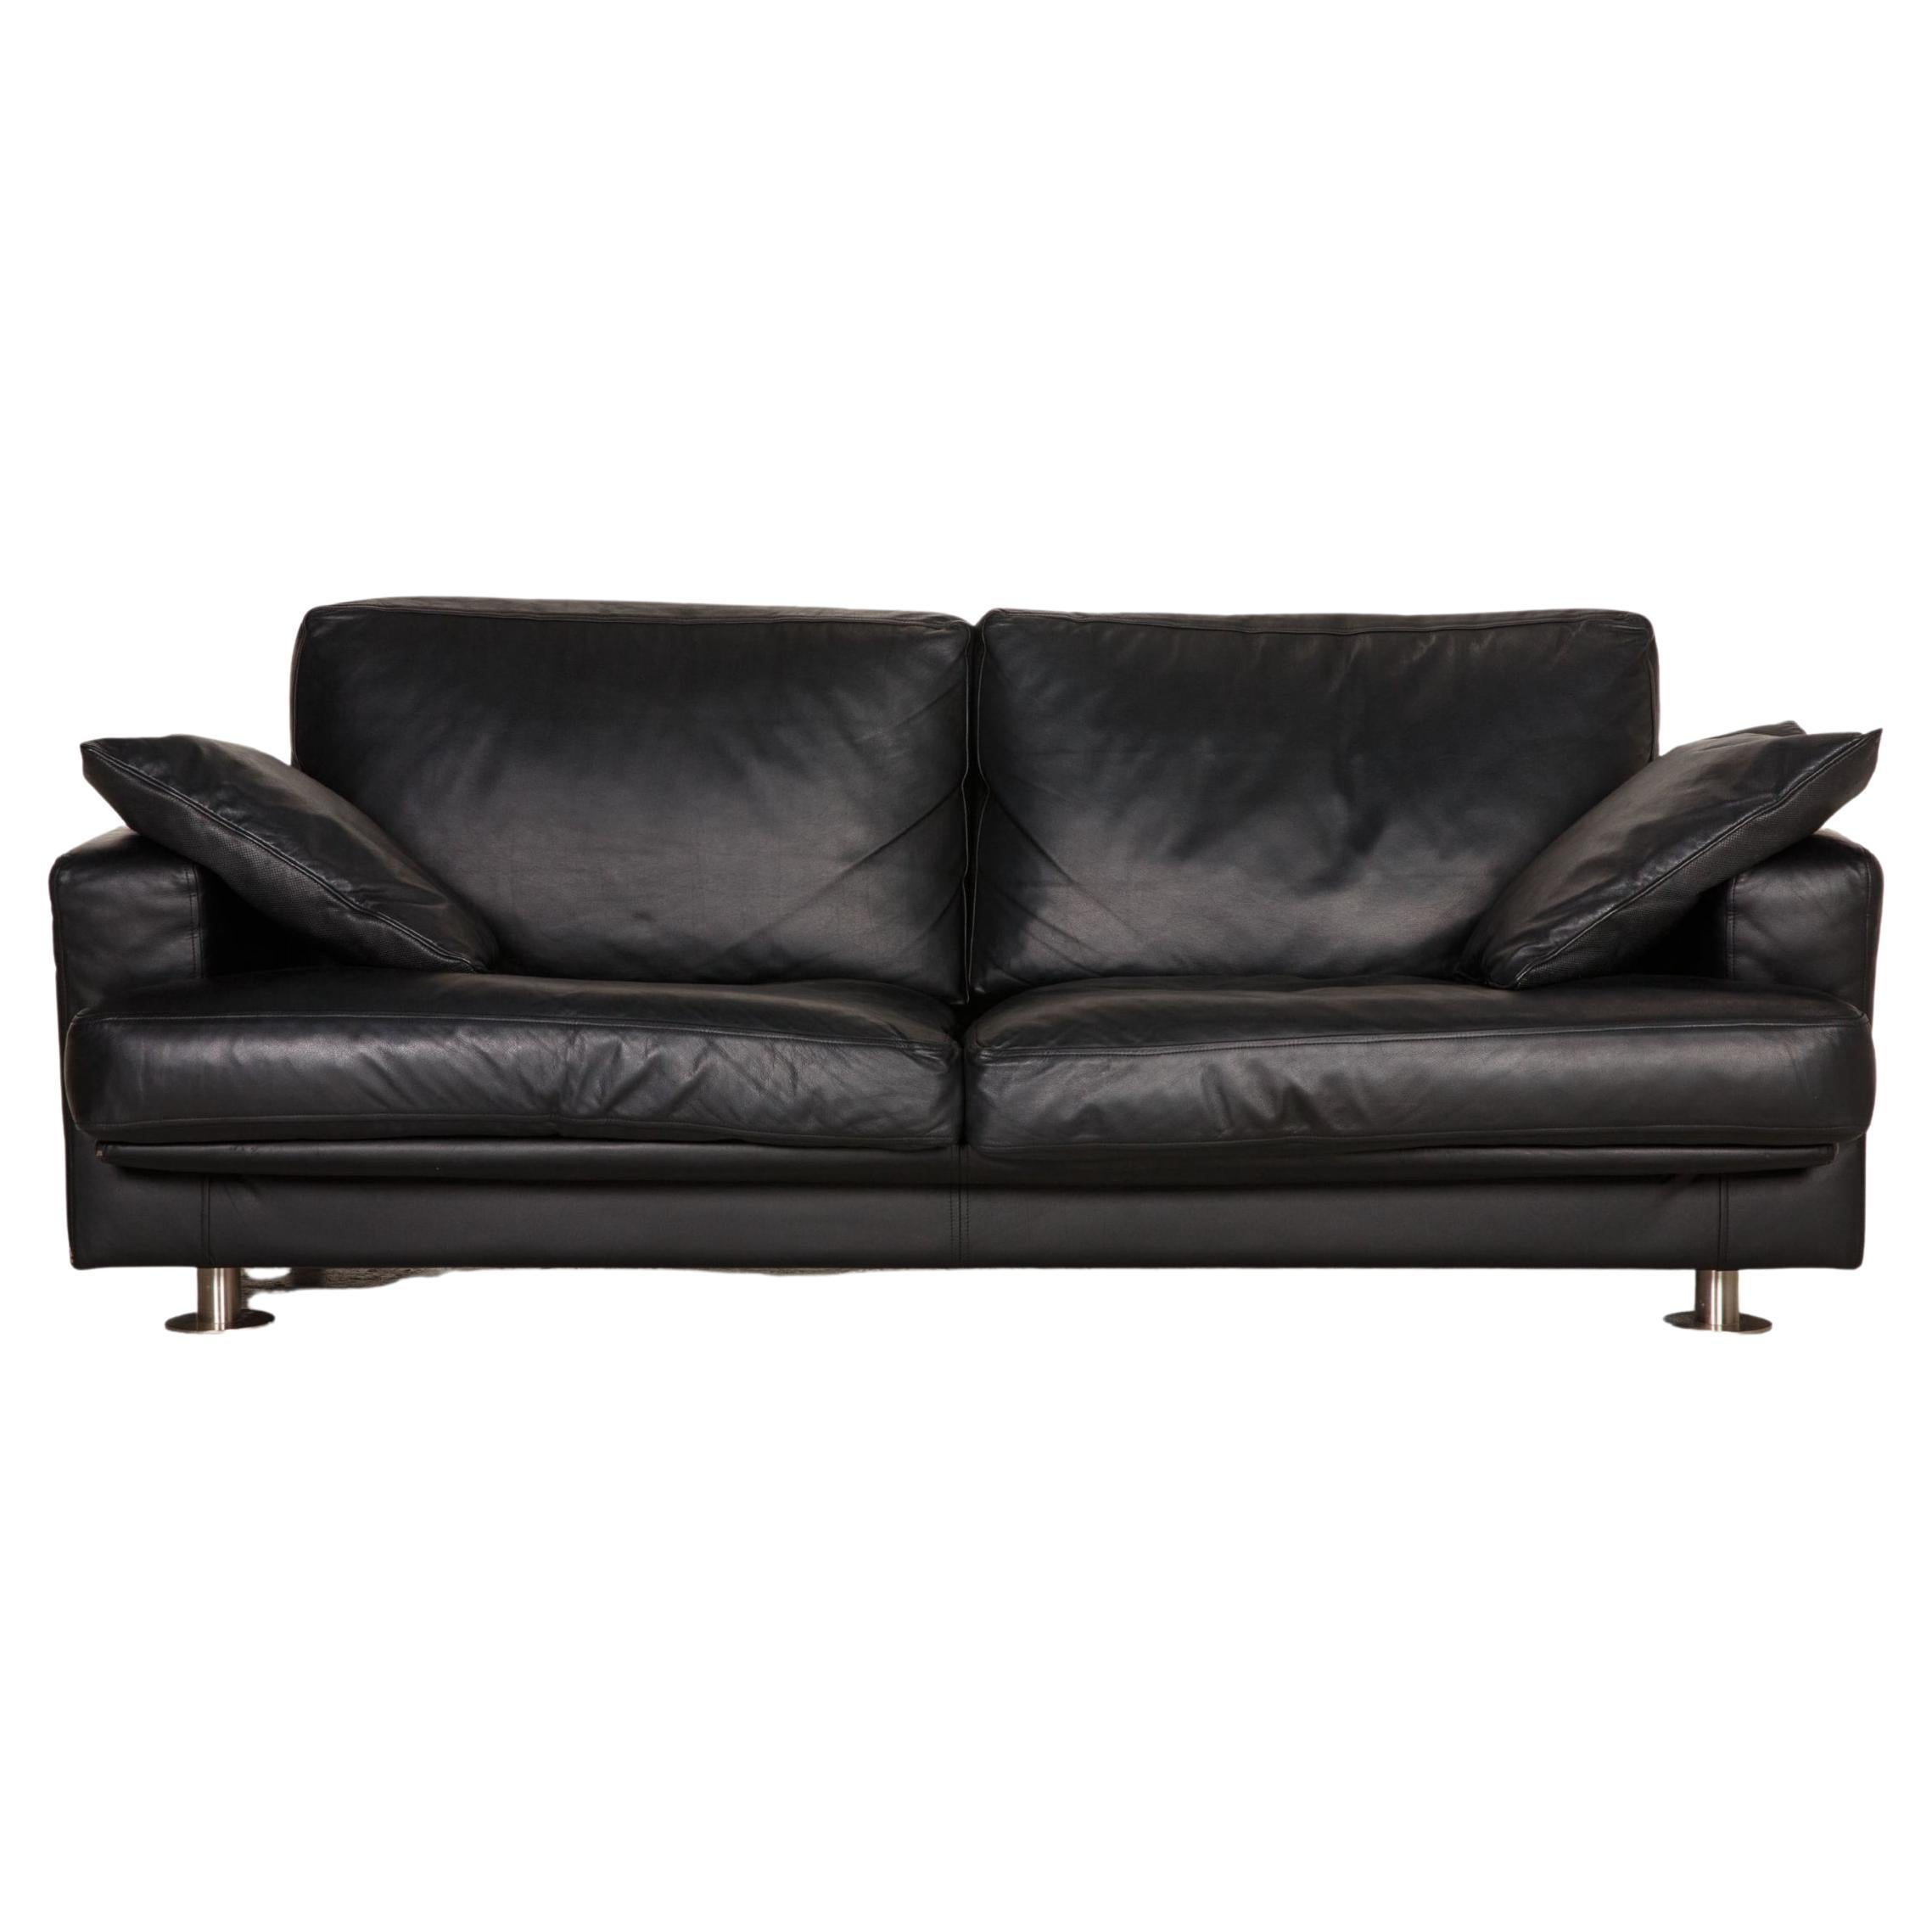 Minotti Lay Down Leather Sofa Black Two Seater Couch For Sale